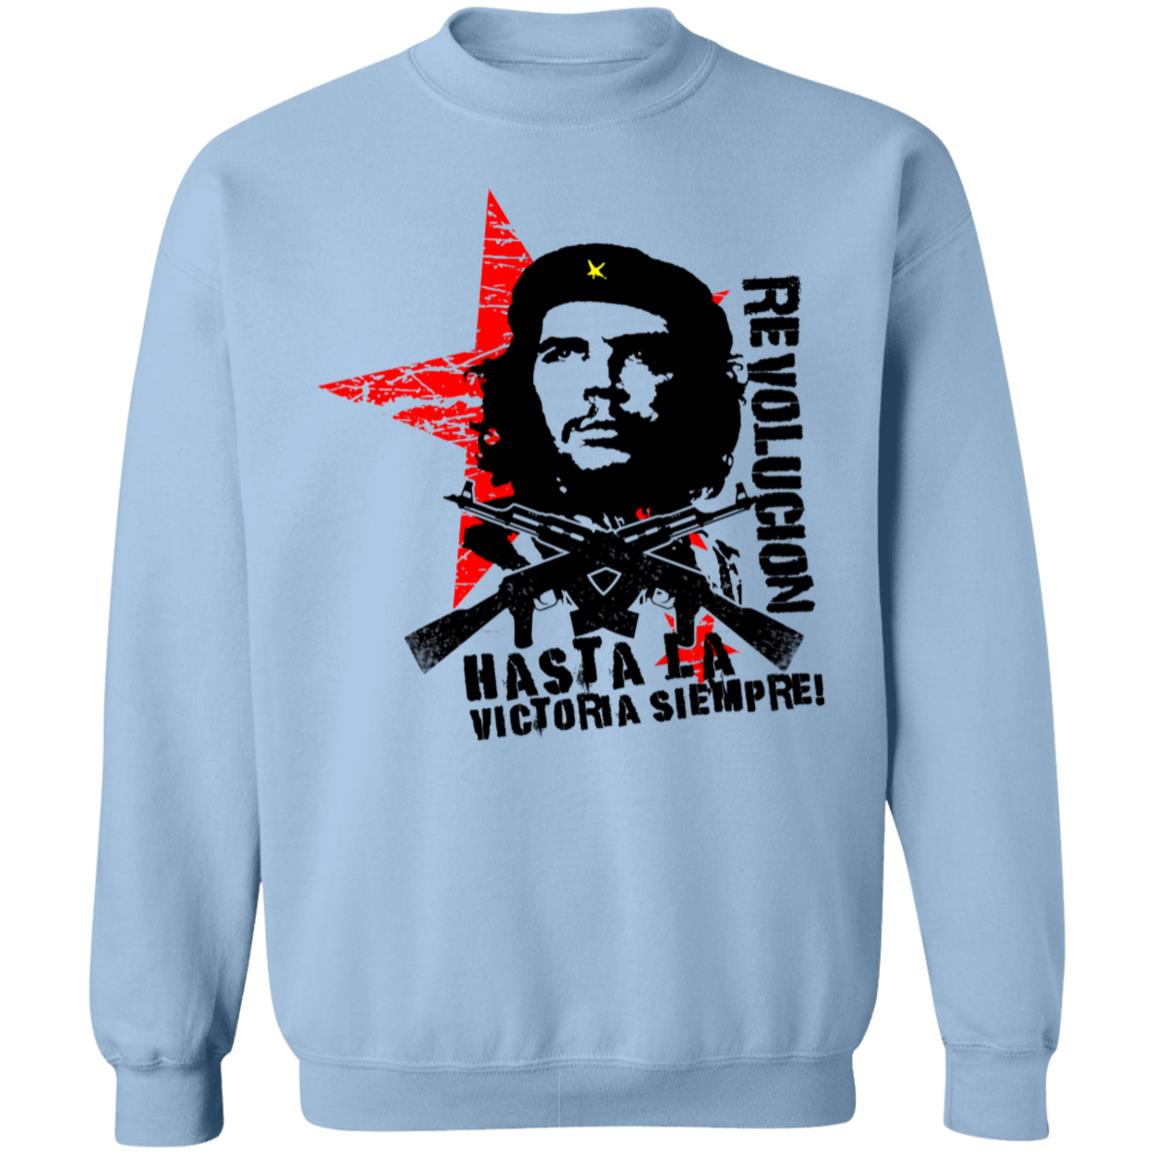 American Vintage Che Guevara T-Shirts for Men